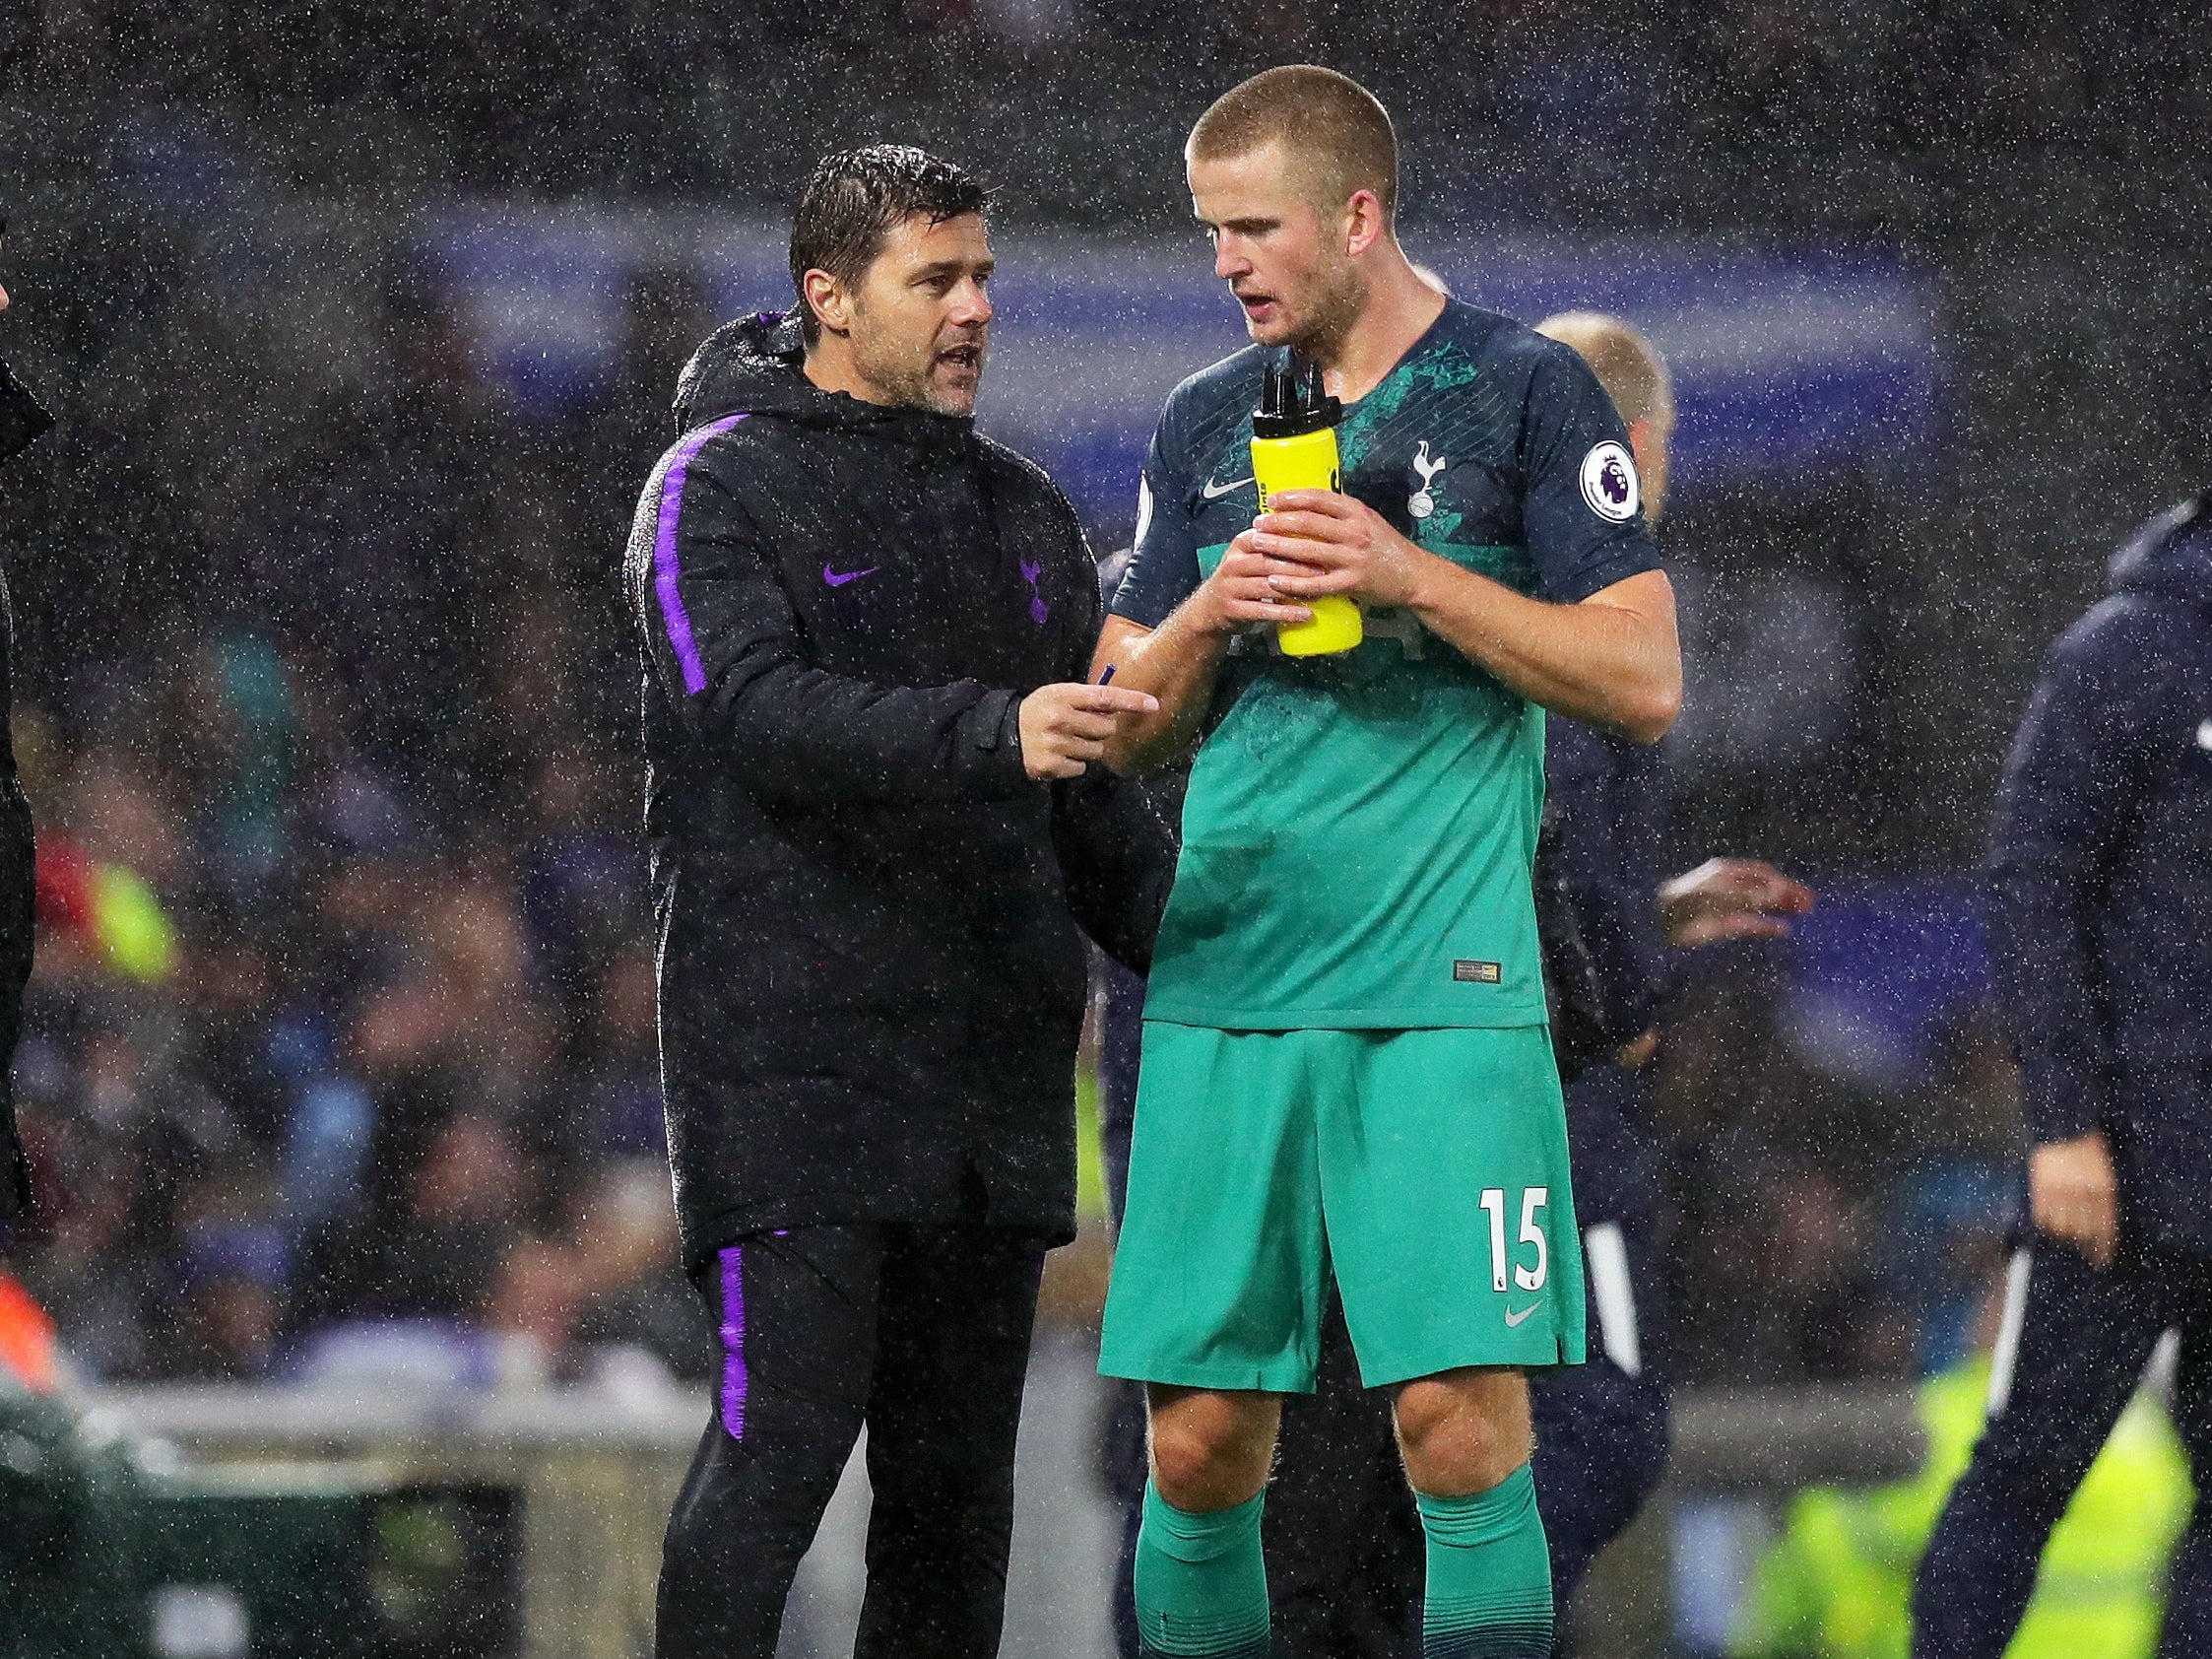 Eric Dier says that Tottenham were determined to have a good season after off-the-pitch problems